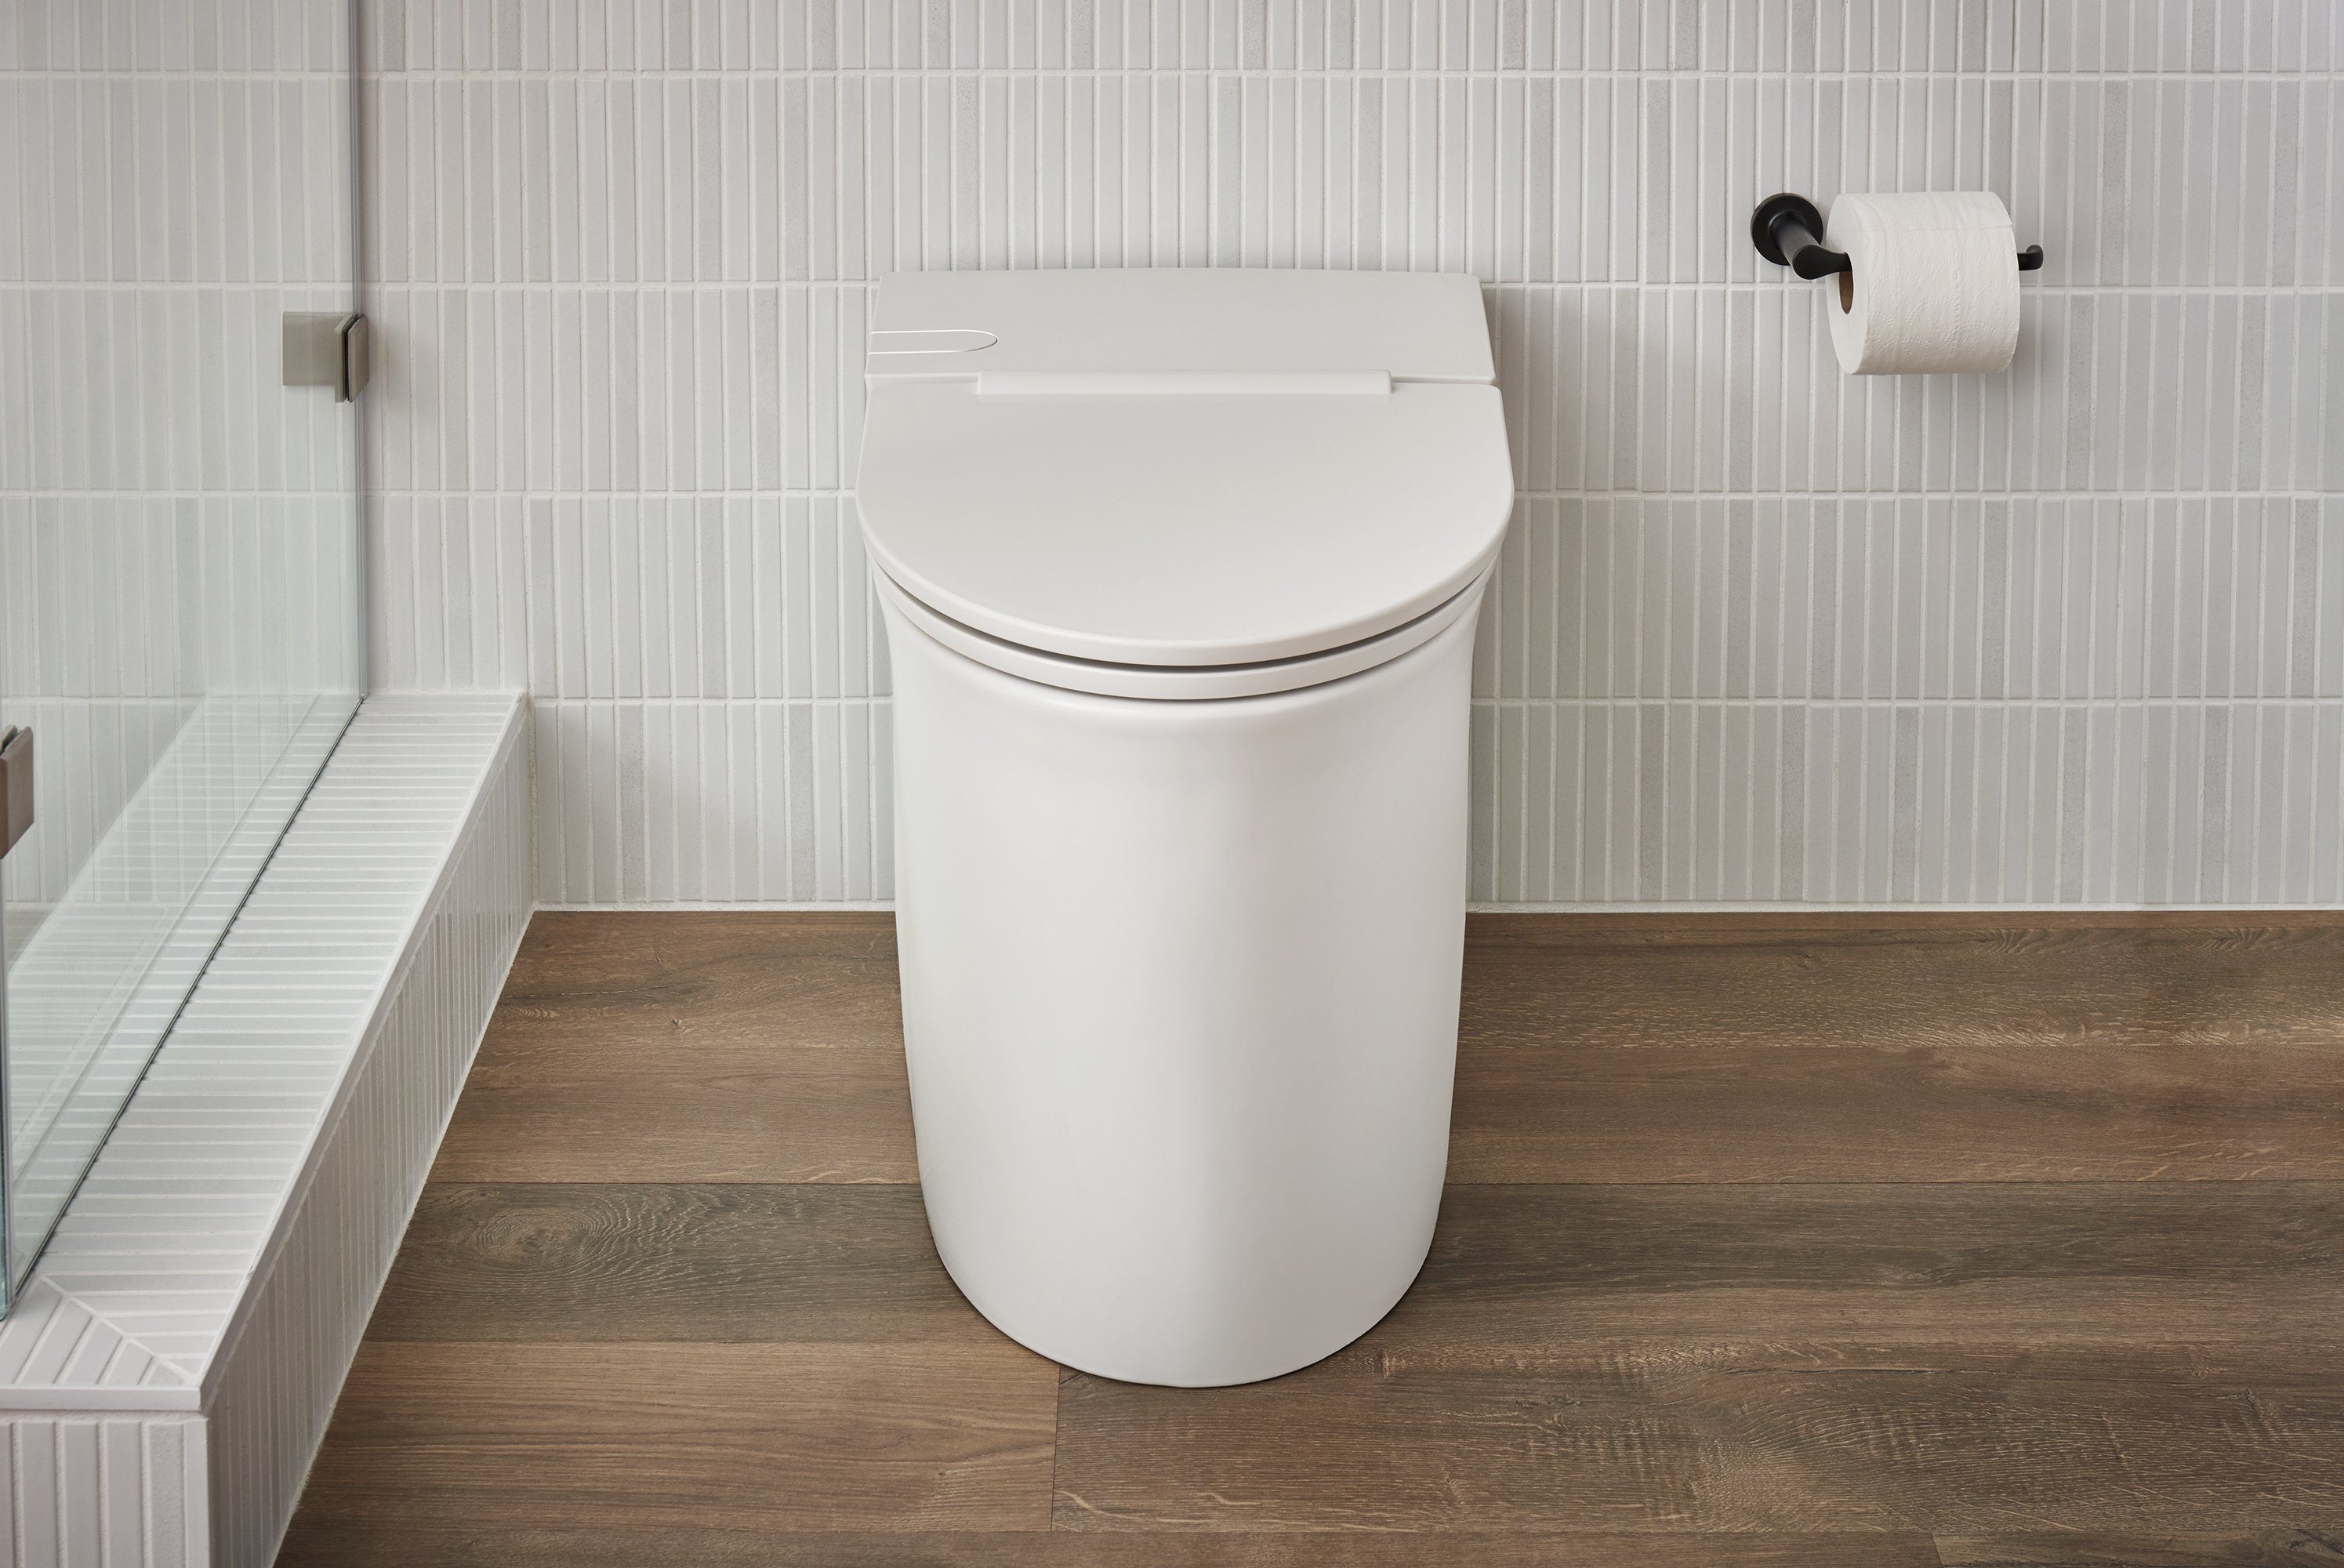 American Standard Studio S 1-piece 1.0 GPF White Elongated Low-Profile Toilet, Seat Included - image 7 of 14